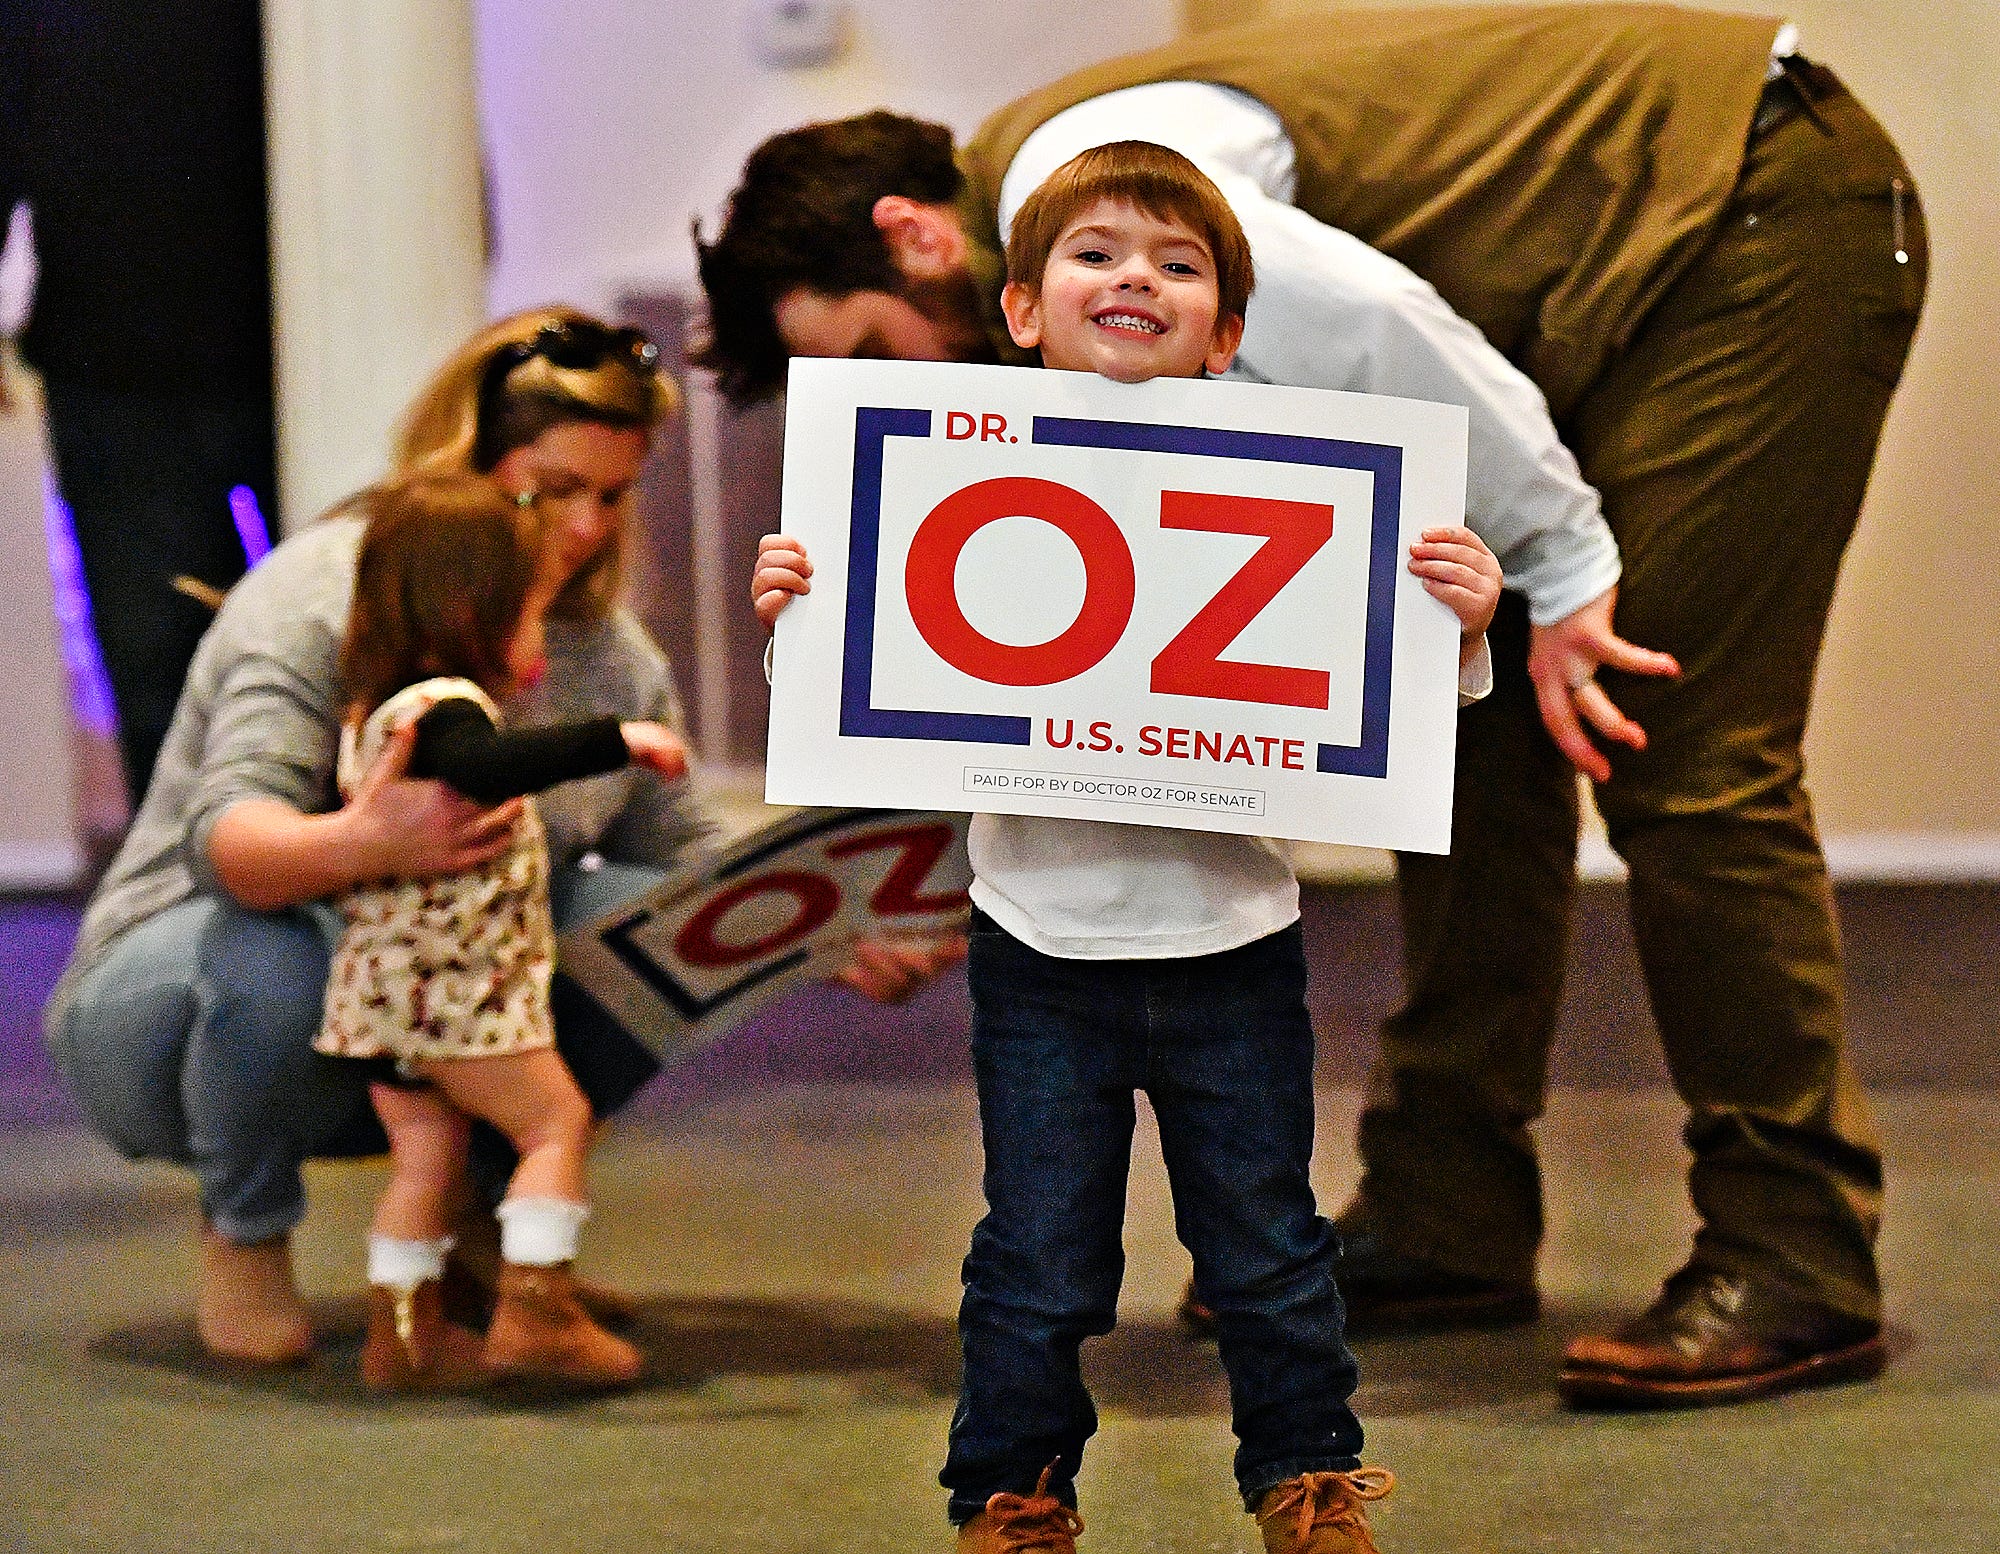 Bryce Baker, 4, of Cumberland County, poses with a campaign sign with his family in the background following the fourth stop along the Doctor Oz for Senate campaign trail at Wisehaven Event Center in Windsor Township, Saturday, Feb. 5, 2022. Baker's mother works for the campaign. Dawn J. Sagert photo